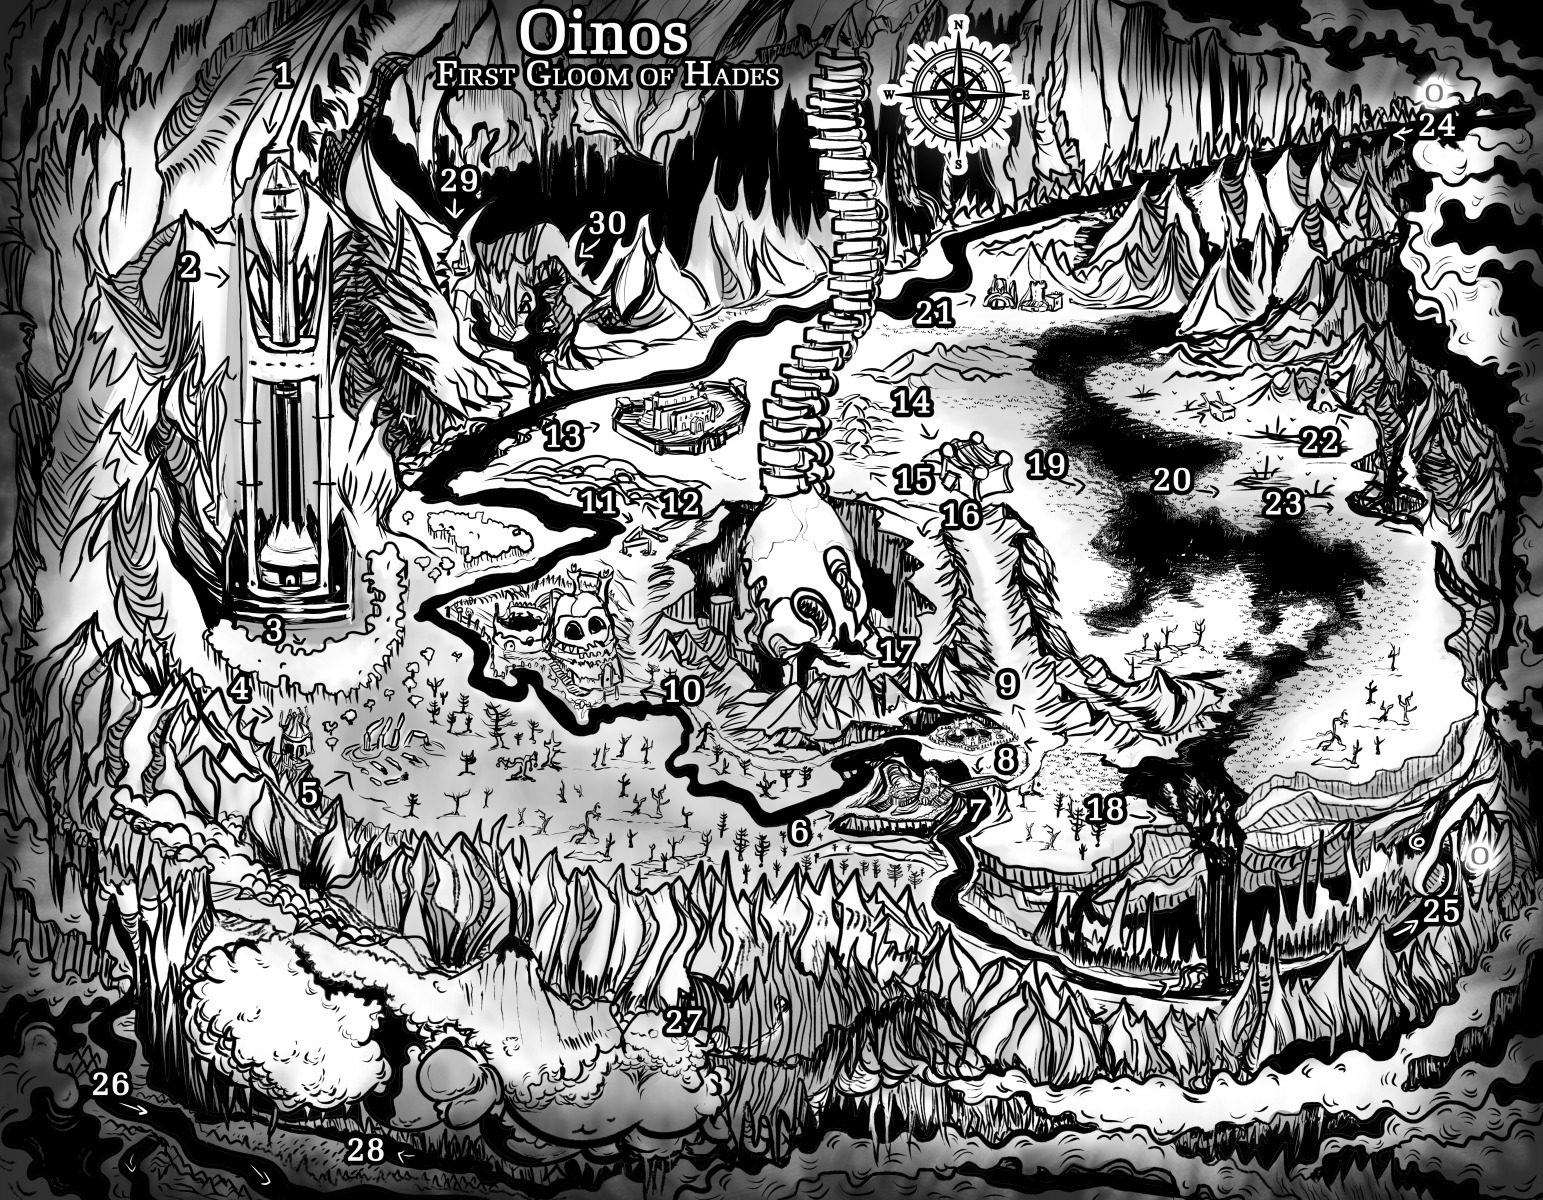 Oinos map of hell hades grimdark fantasy setting dark satan black and white ink wimblebilder bw b/w cartography custom ink river spine tower for custom dungeons and dragons dnd 5e setting